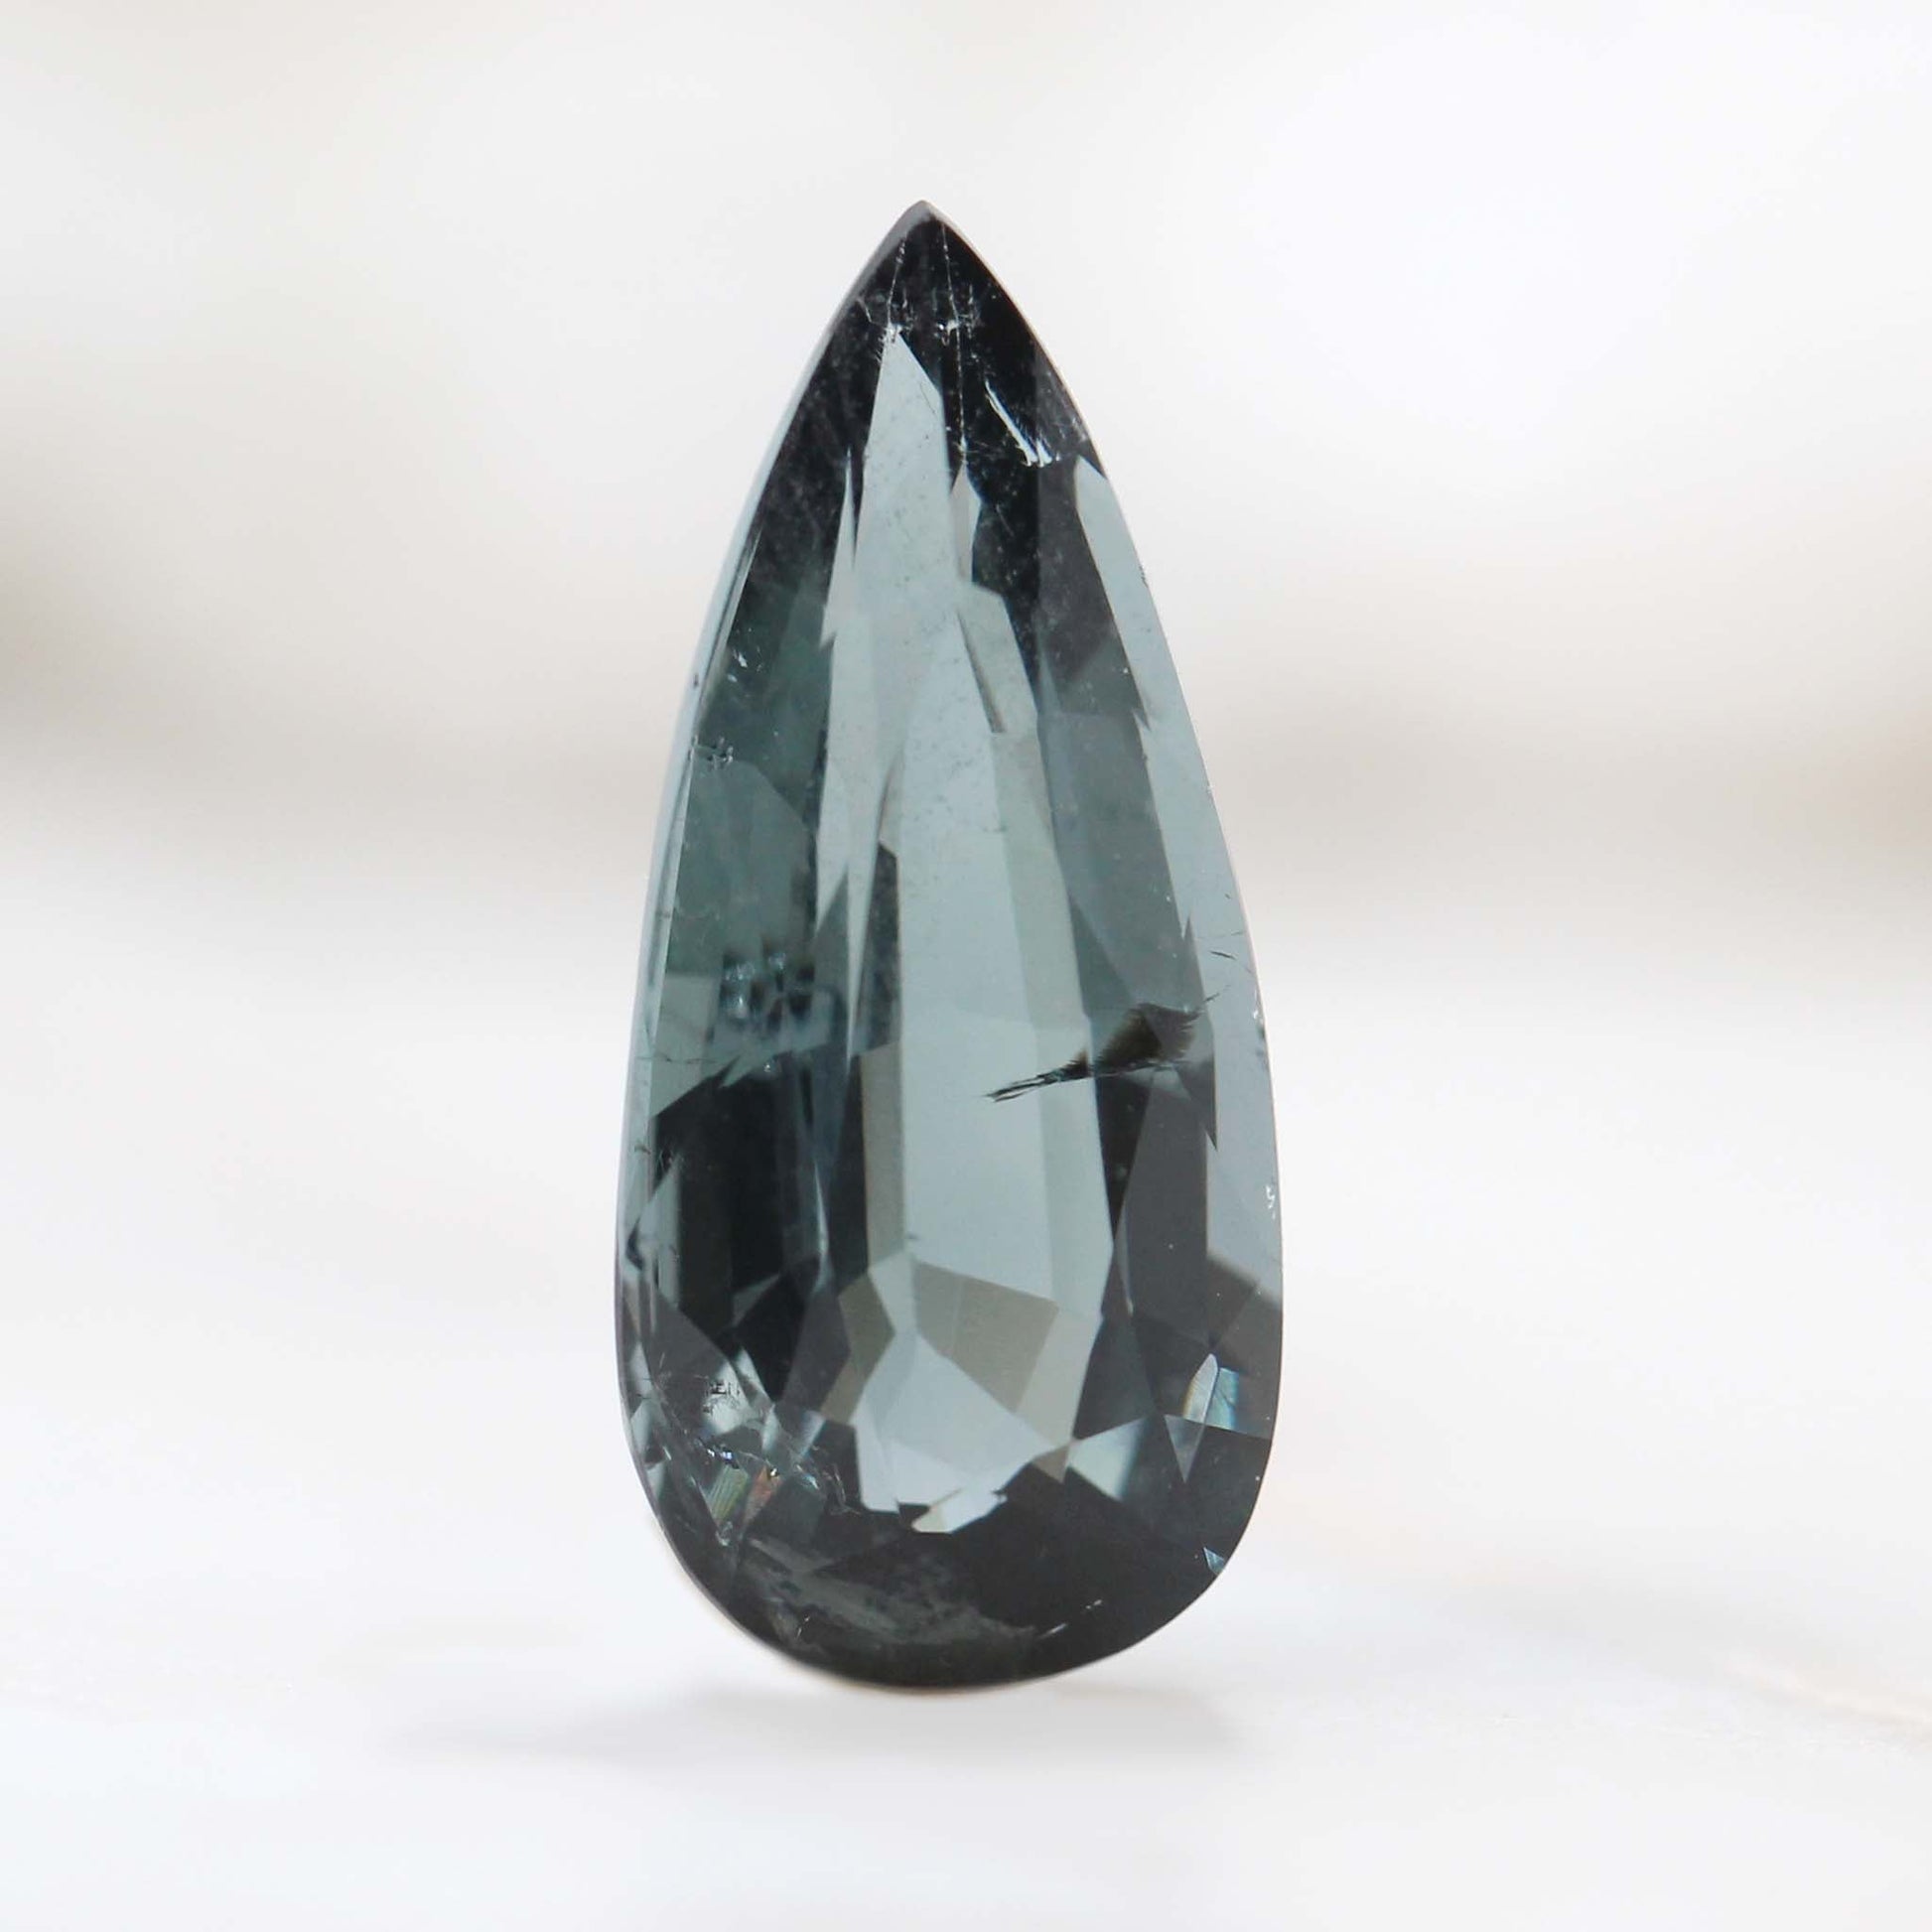 CAELEN (M) 5.02 Carat Blue Pear Tourmaline/Indicolite for Custom Work - Inventory Code IBP502 - Midwinter Co. Alternative Bridal Rings and Modern Fine Jewelry